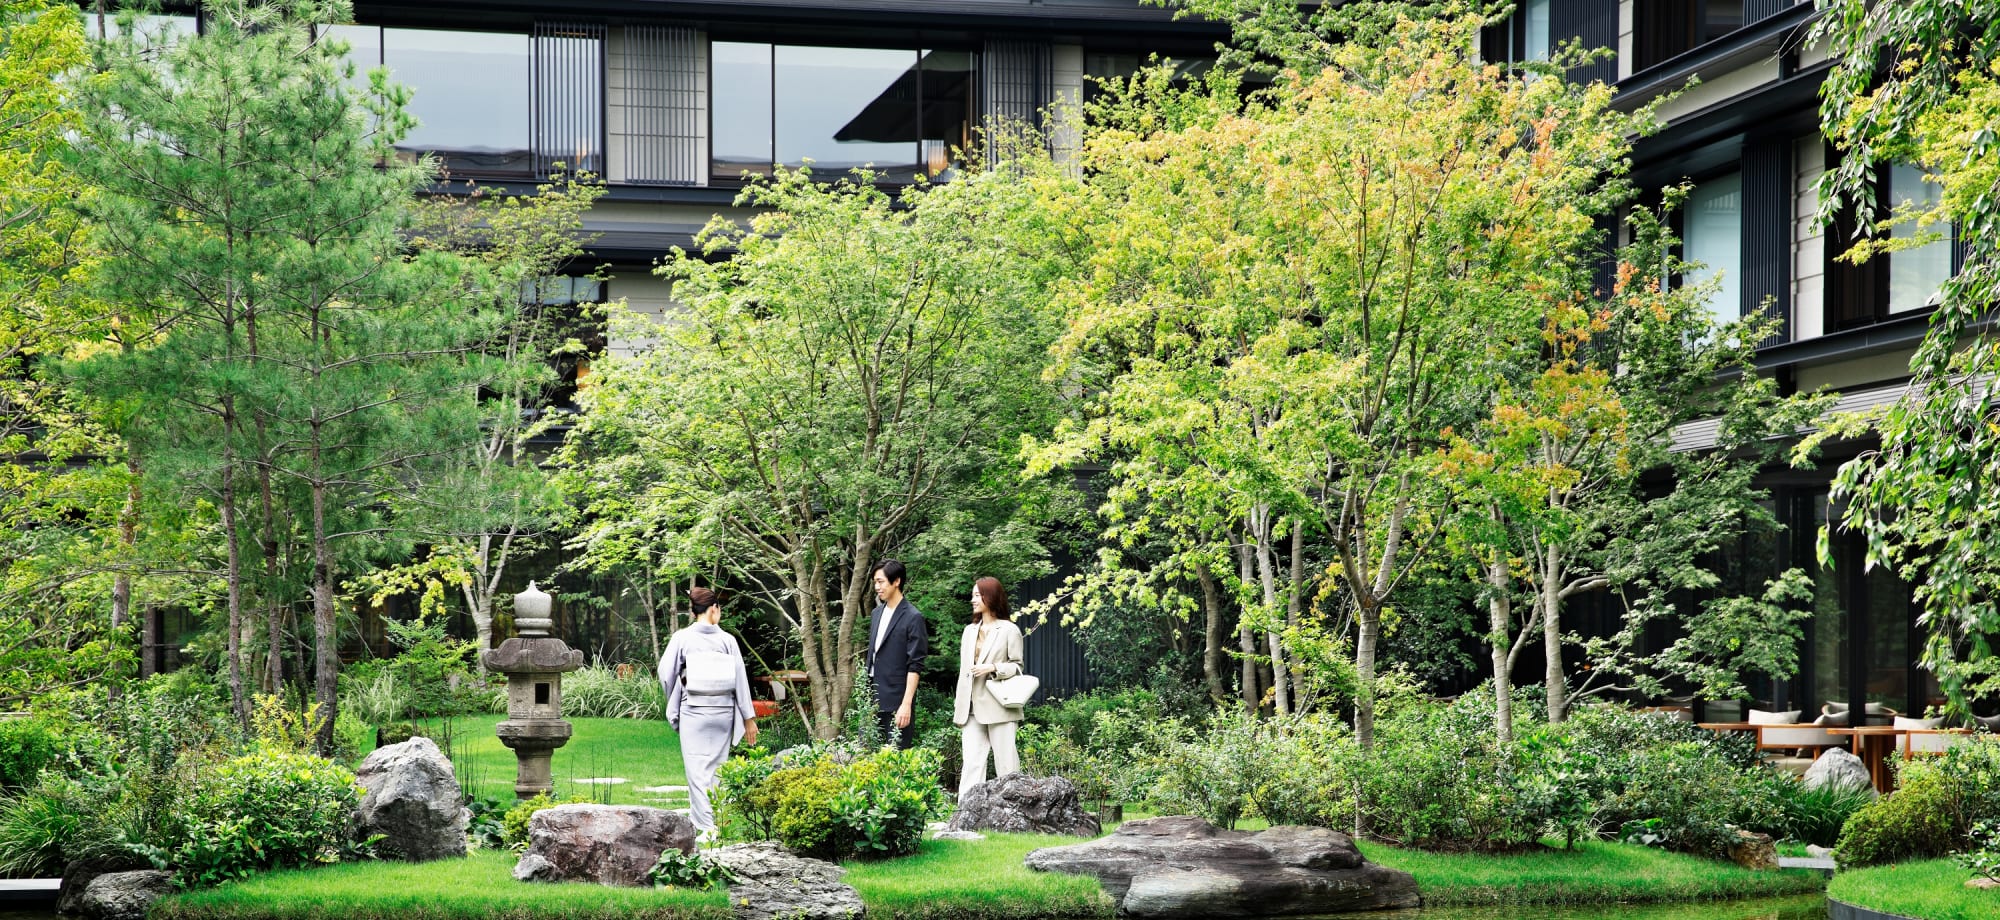 The Mitsui garden is surrounded by trees, rocks, water features and a pond. 